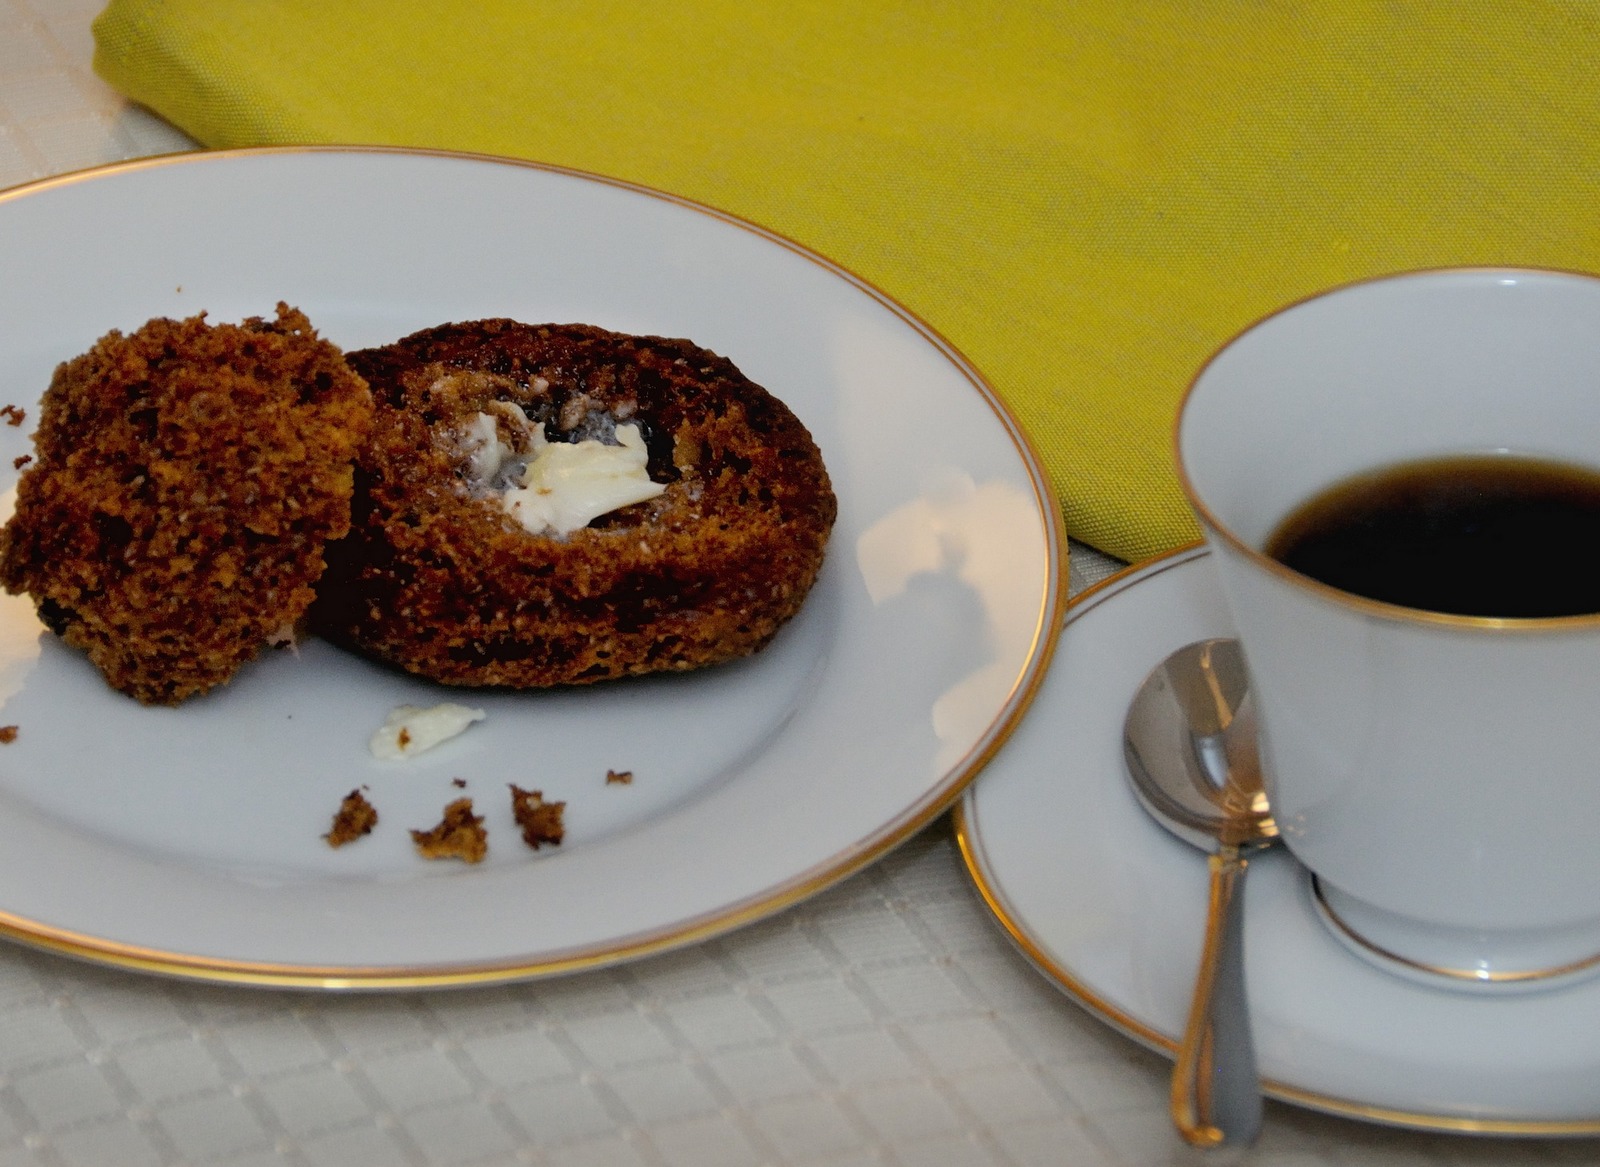 Kathi's Bran Muffins, Gold Rimmed Plates, Coffee